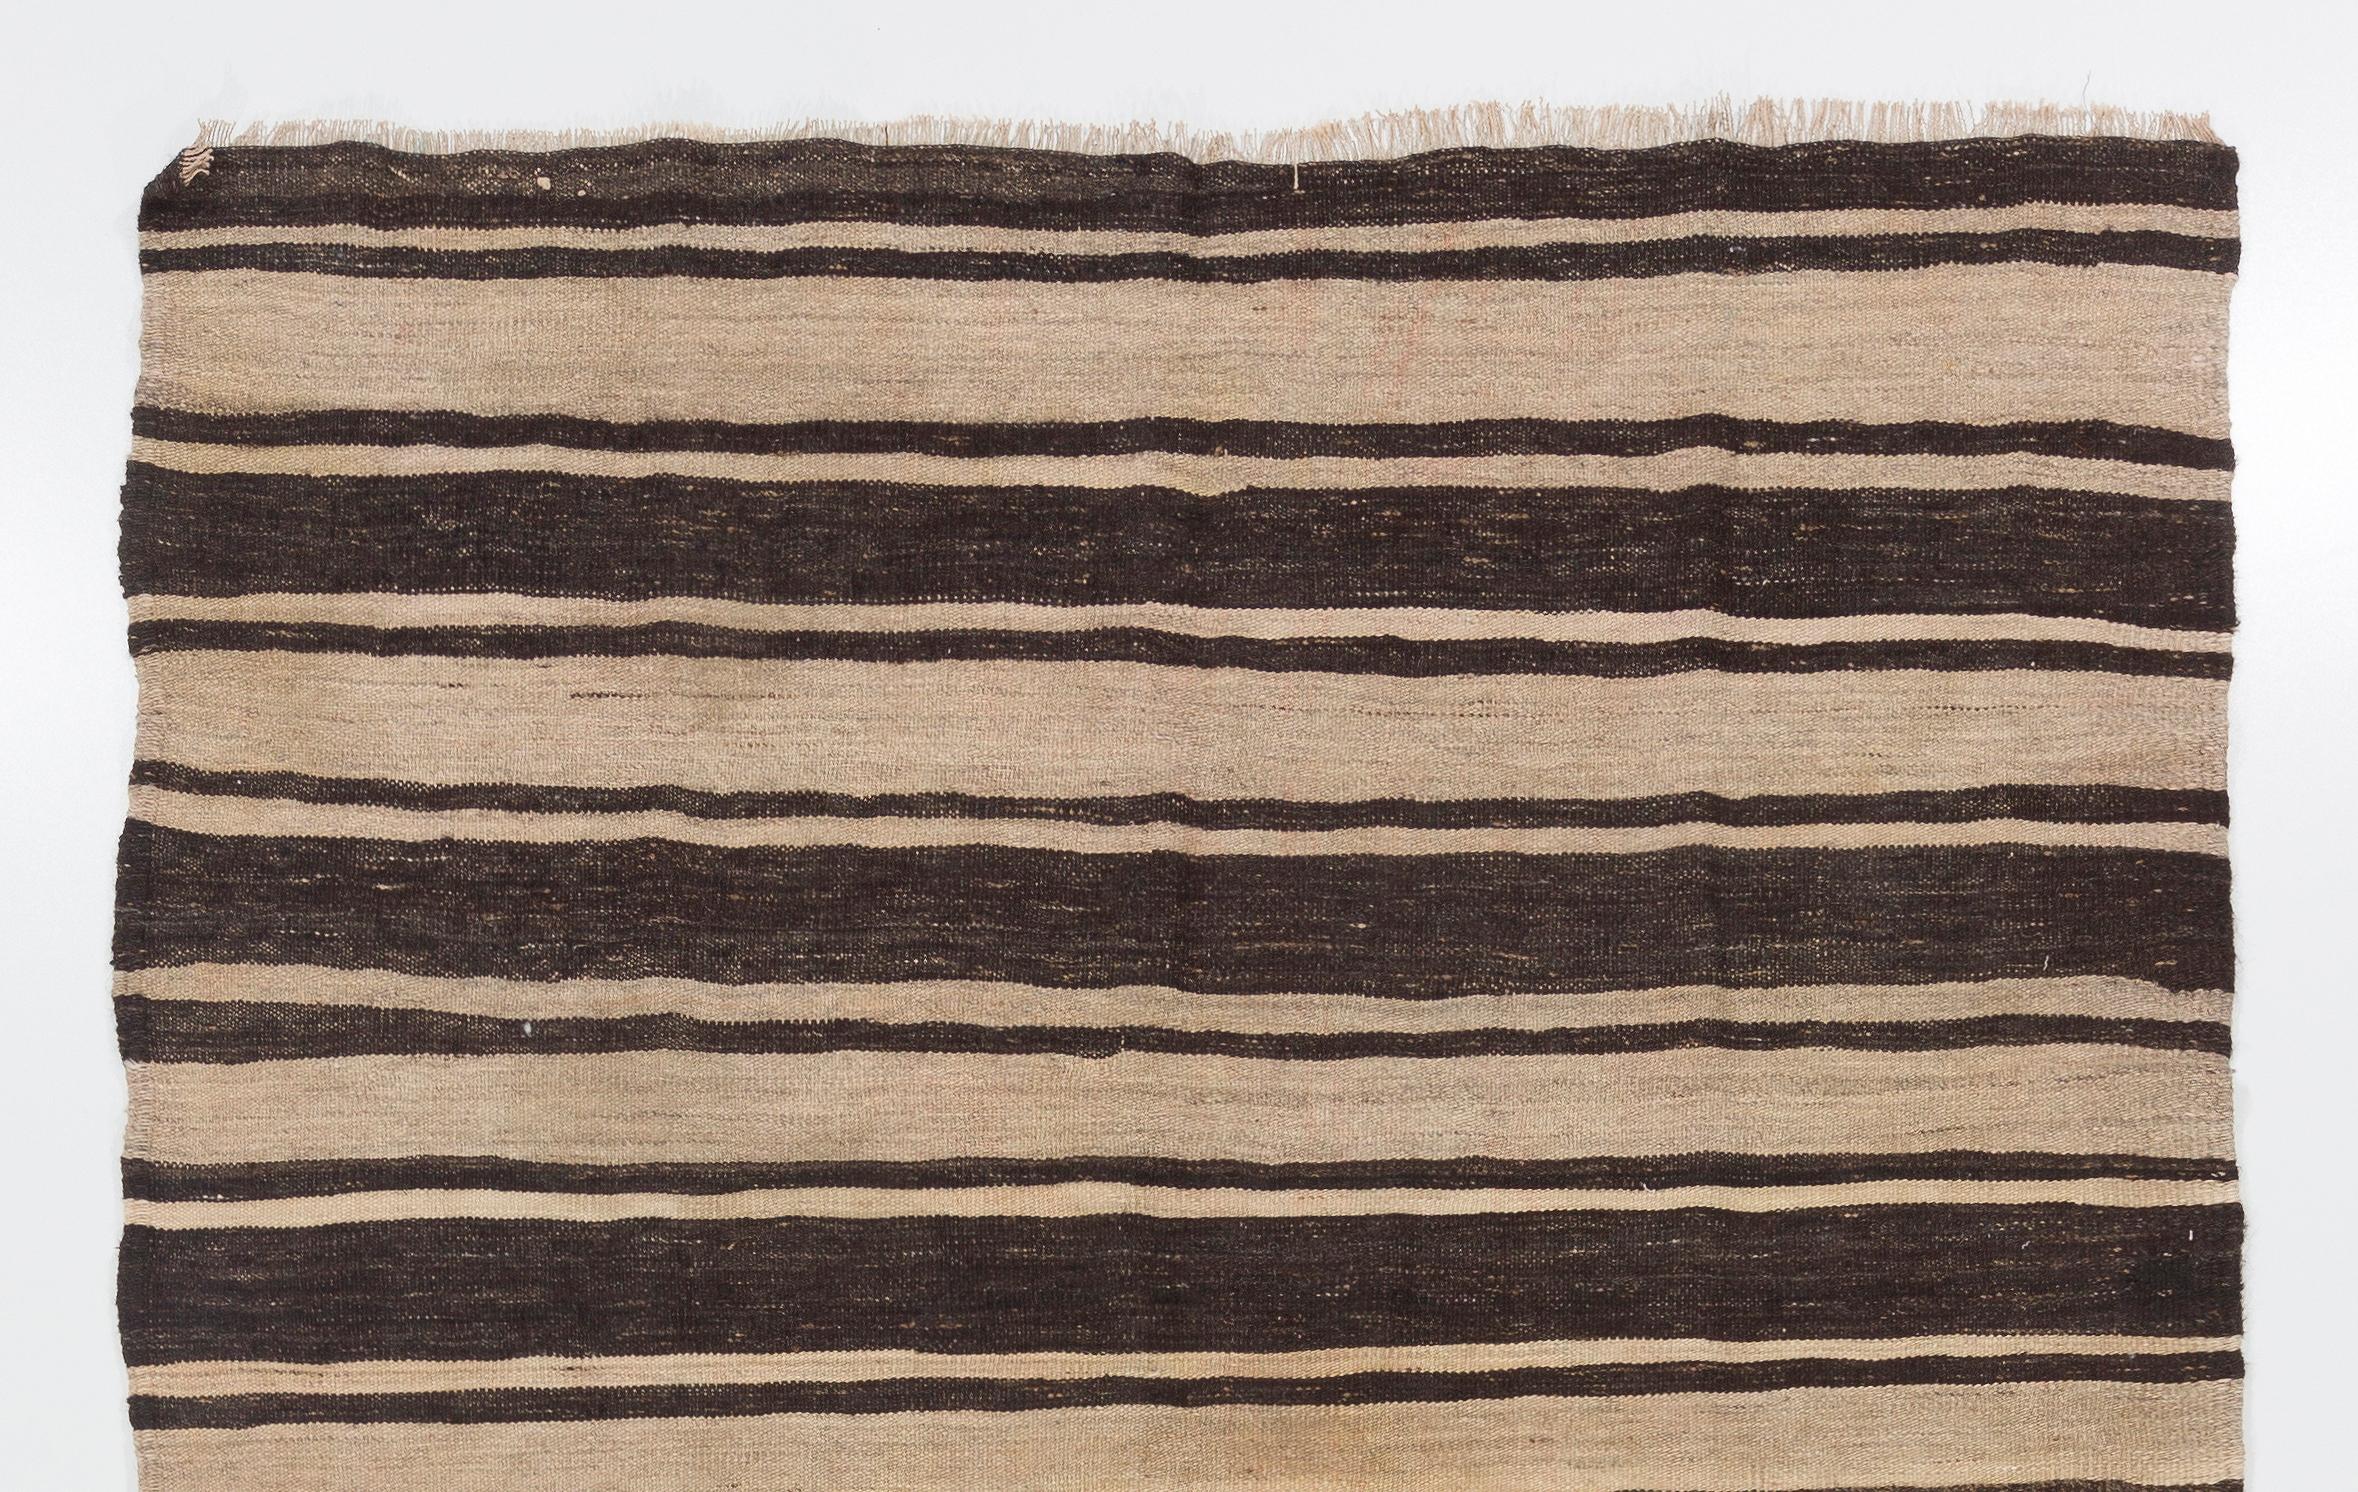 This simple handwoven rug made to be used by the villagers in Central Anatolia. 100% natural undyed wool. Good condition and cleaned professionally.
We can modify the dimensions if requested, i.e. make it shorter and/or narrower. Mreasures: